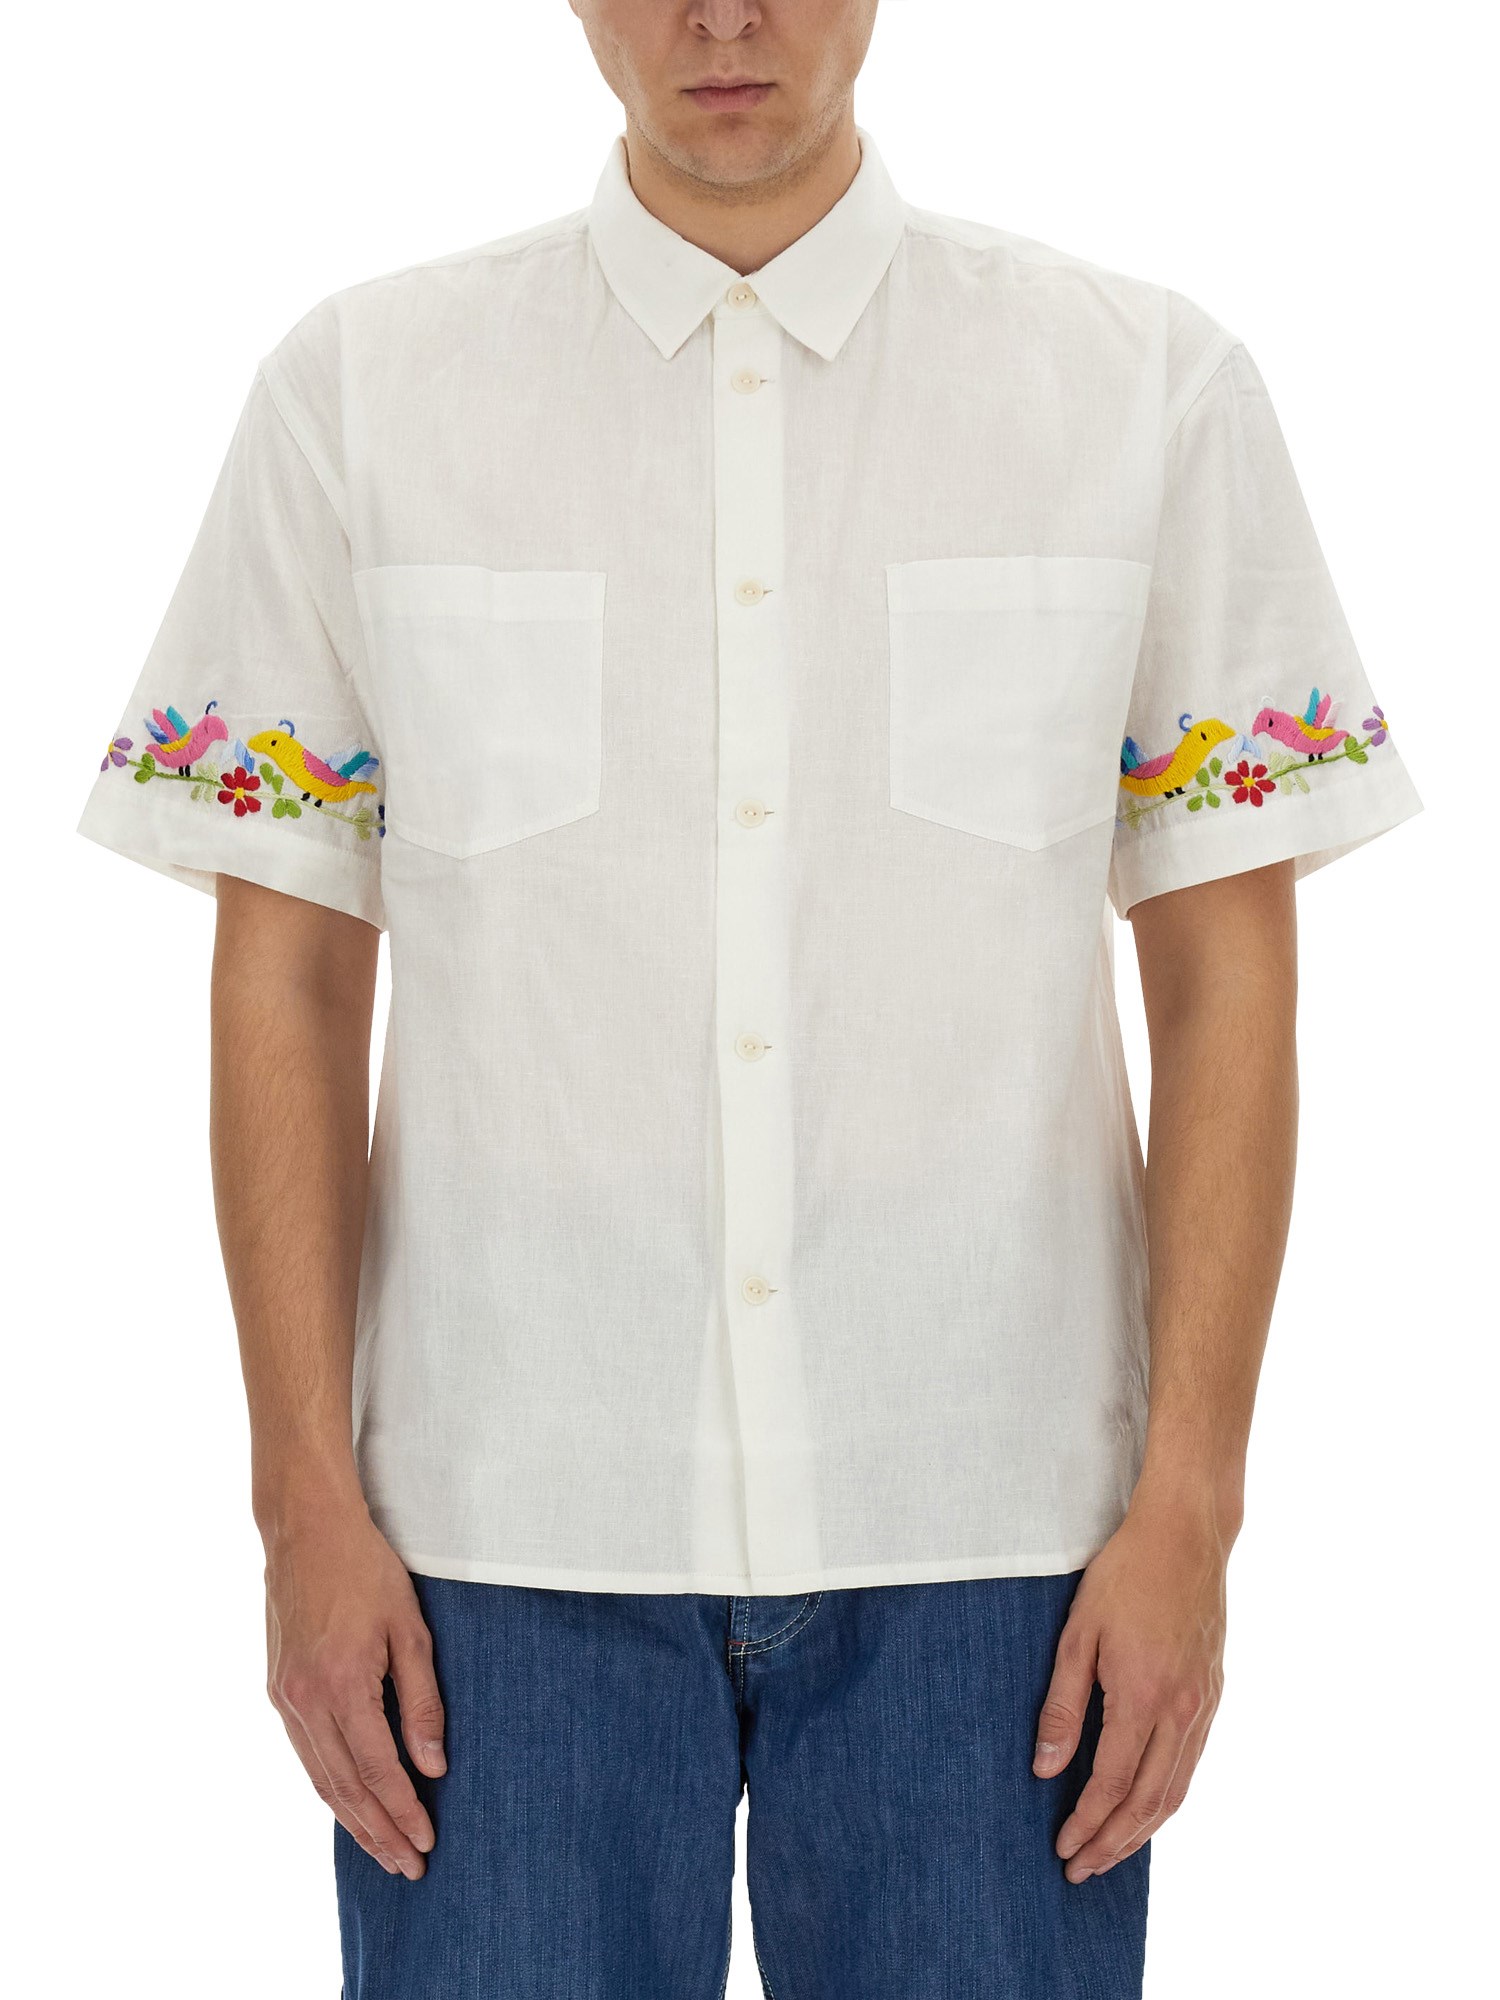 Ymc ymc shirt with embroidery